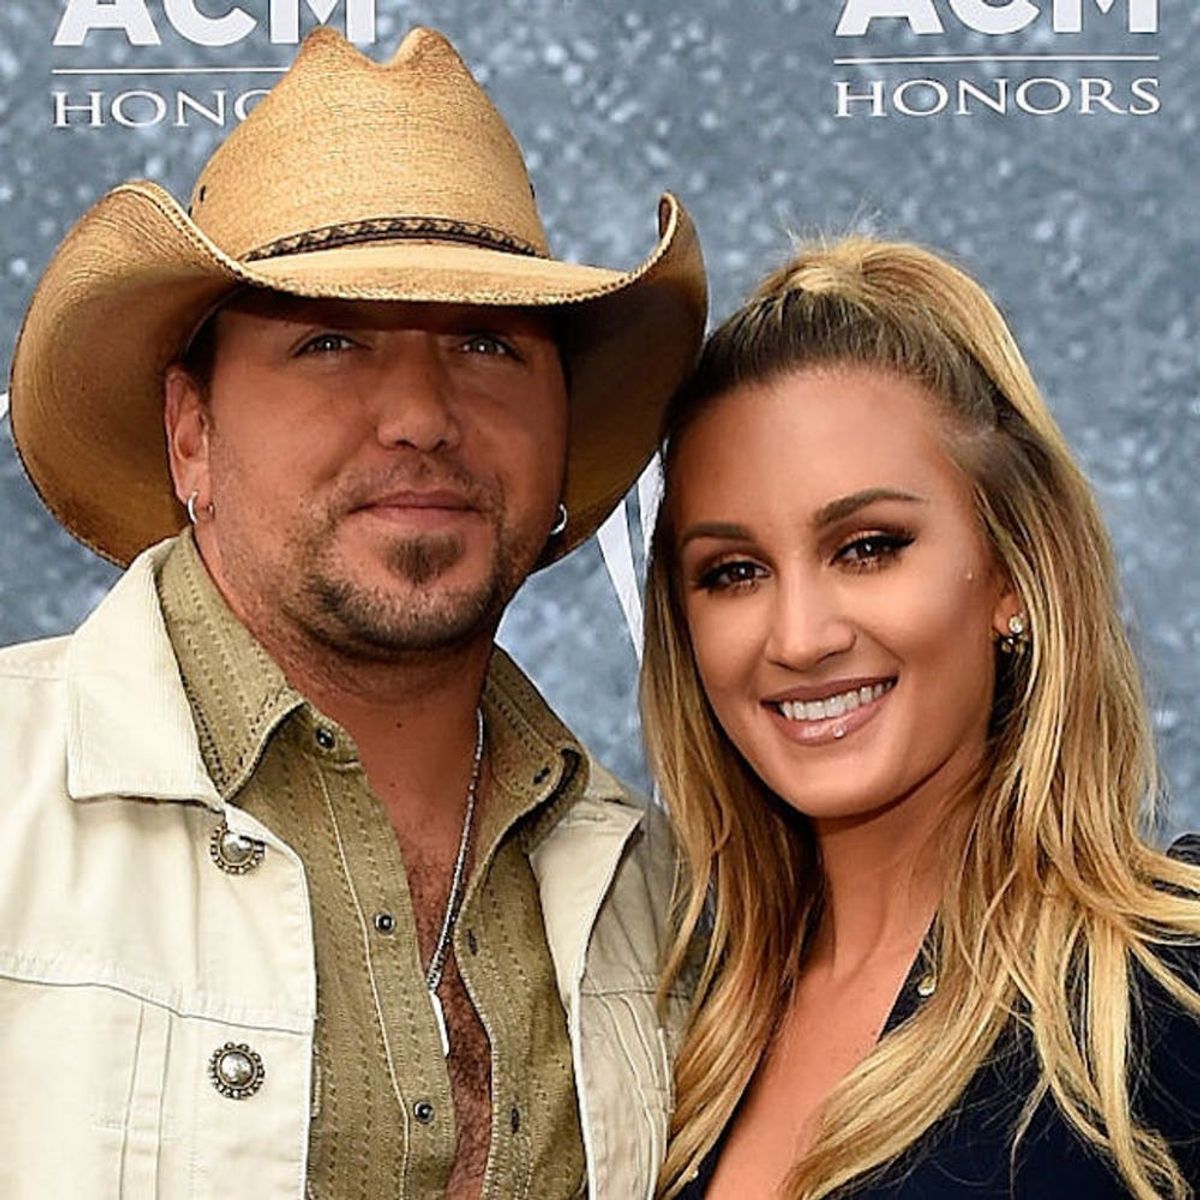 Morning Buzz! Jason Aldean and Wife Brittany Kerr Are Expecting Their First Baby + More